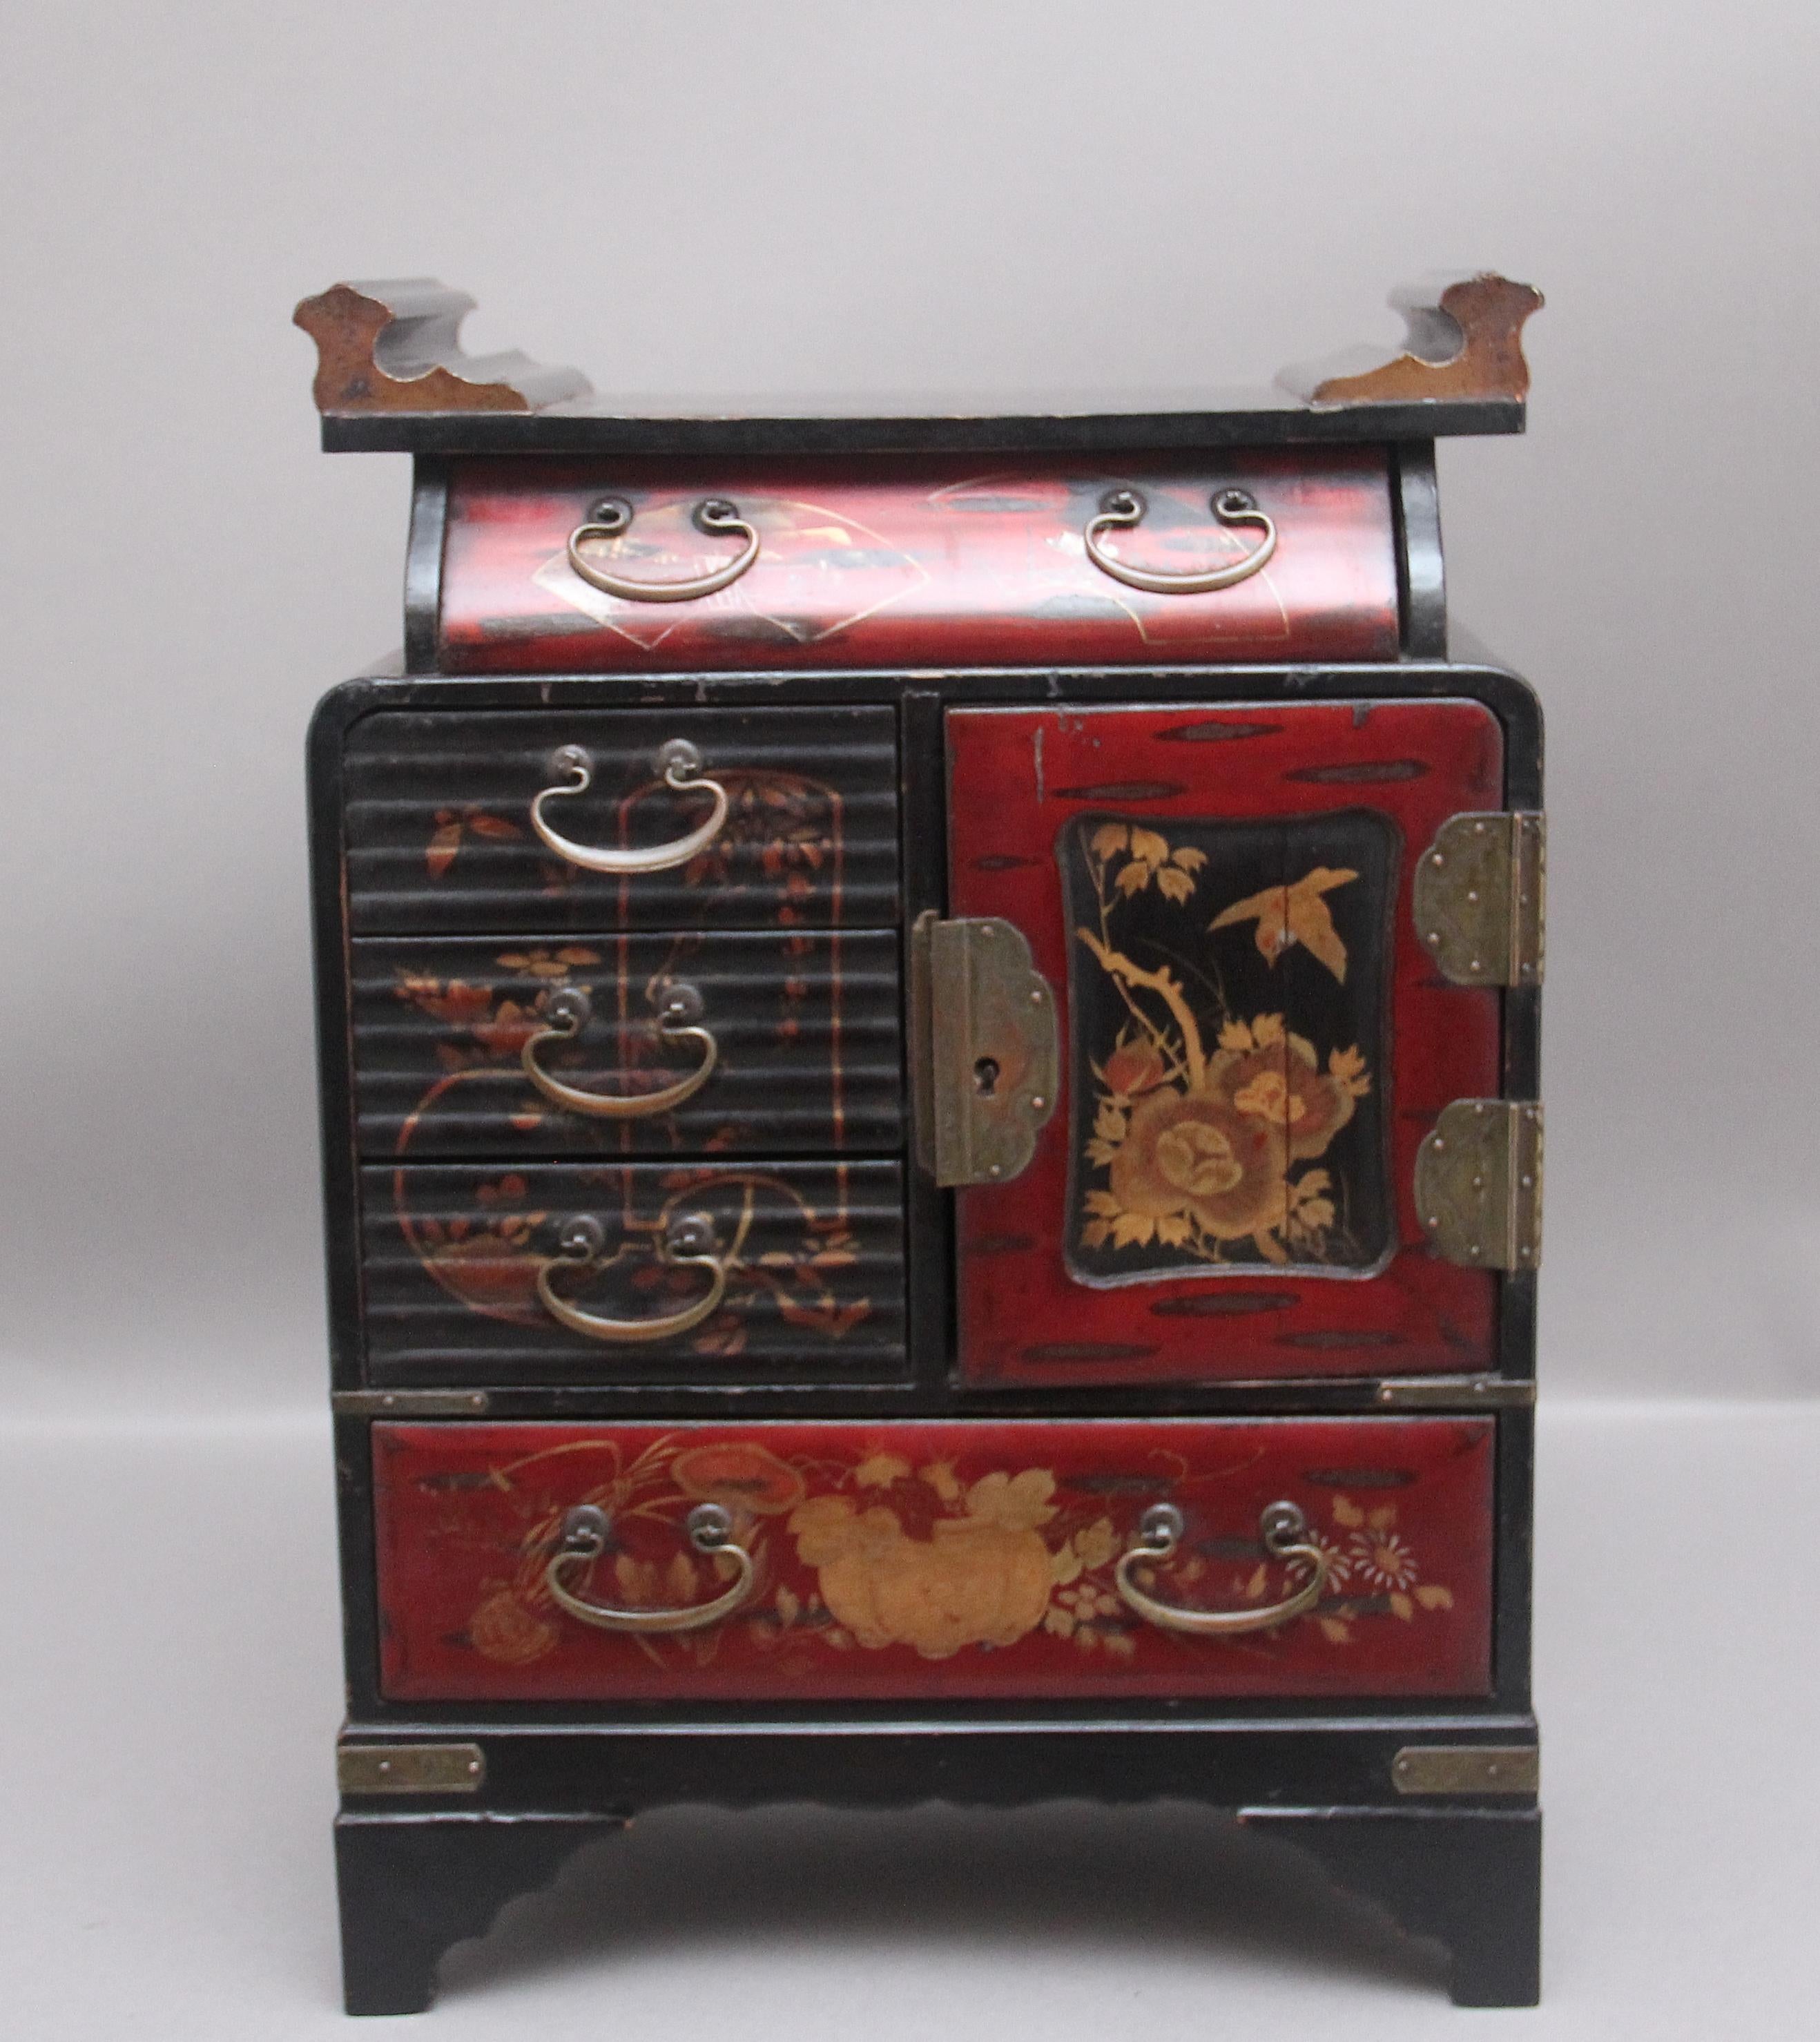 19th Century Japanese lacquered table cabinet from the Meiji period, having a shaped top in the typical Japanese style, the top, sides and front lacquered with floral decoration, the front of the cabinet consisting of five various size drawers with